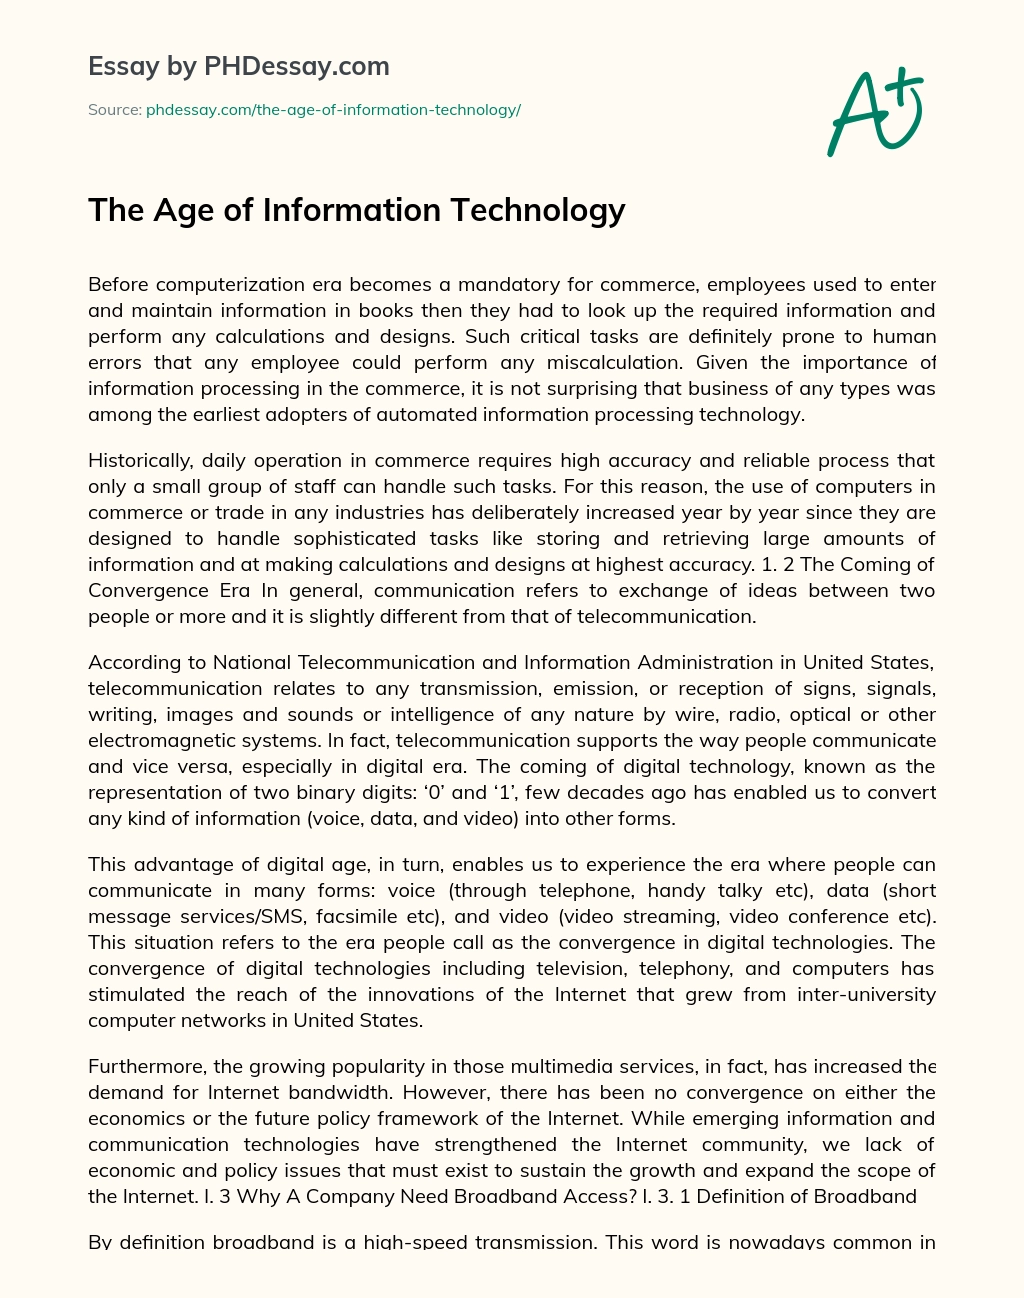 the age of information technology essay